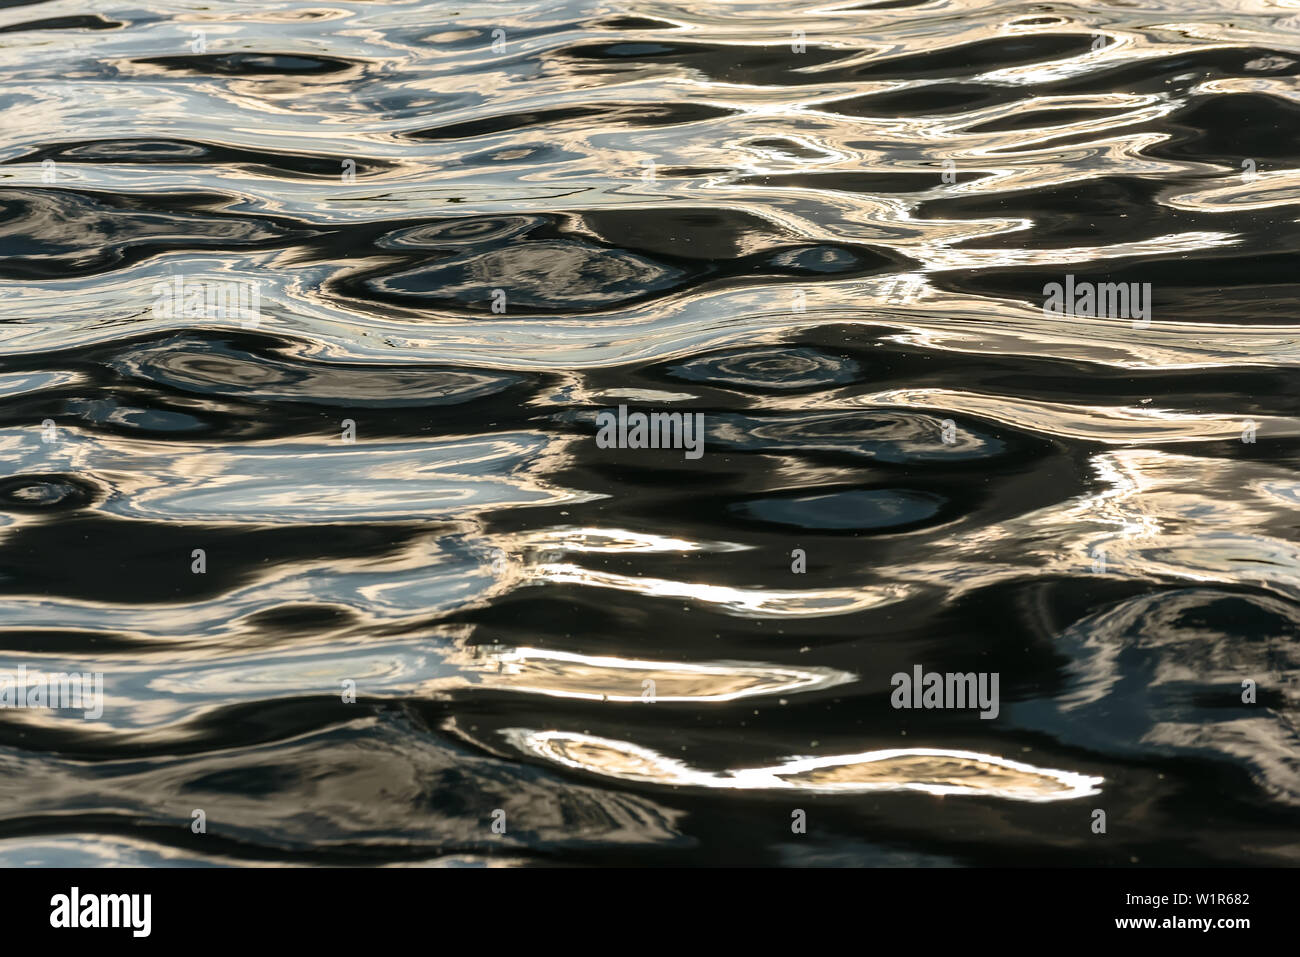 Abstract natural background of water texture with reflection of clouds in beautiful waves of dark water at sunset Stock Photo